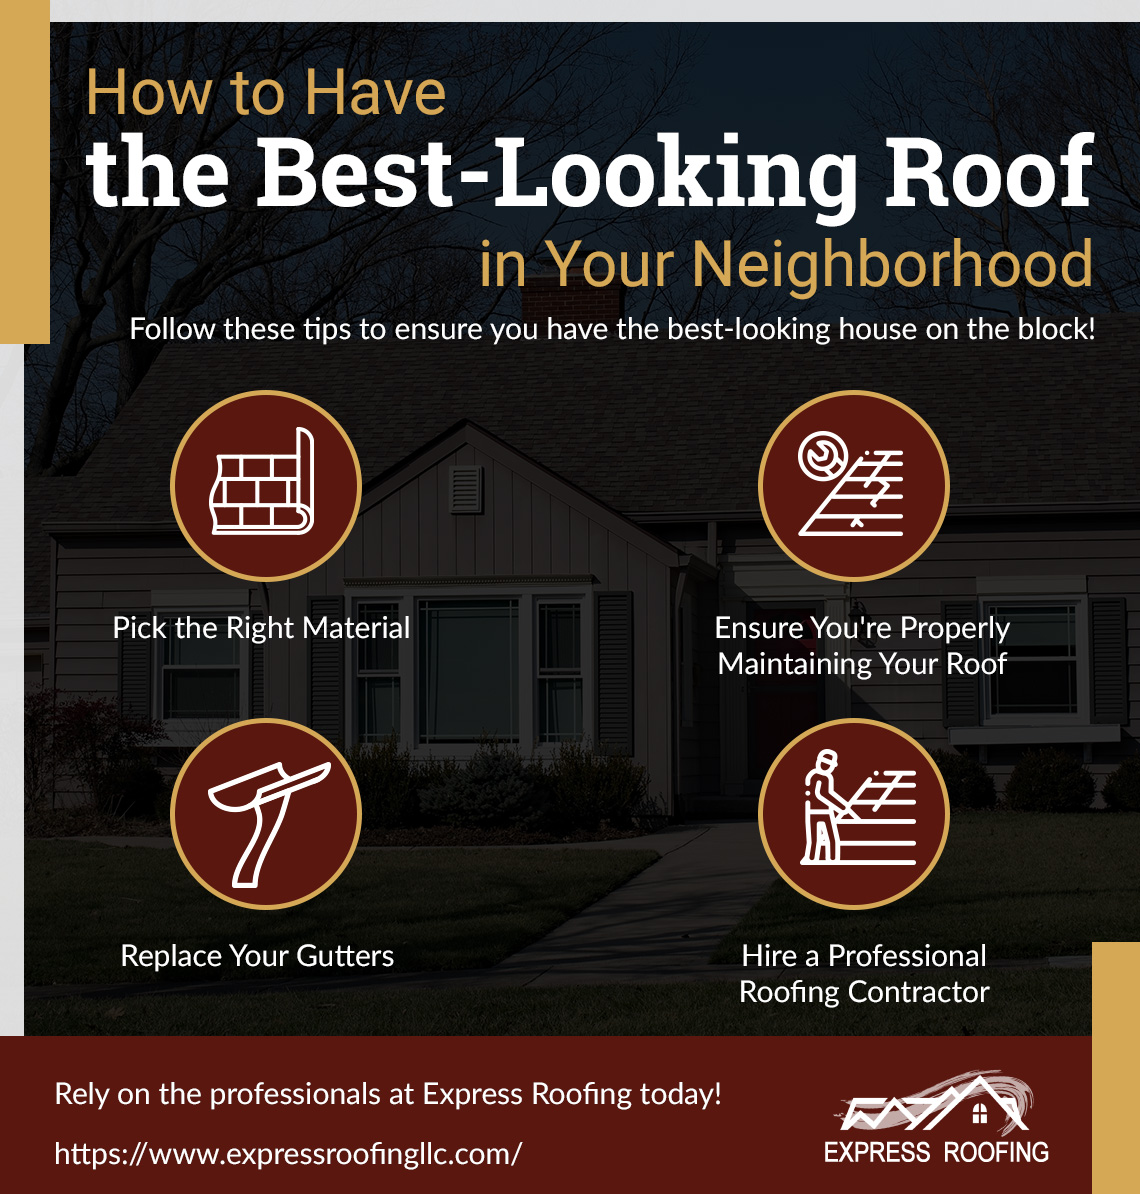 How-to-Have-the-Best-Looking-Roof-in-Your-Neighborhood